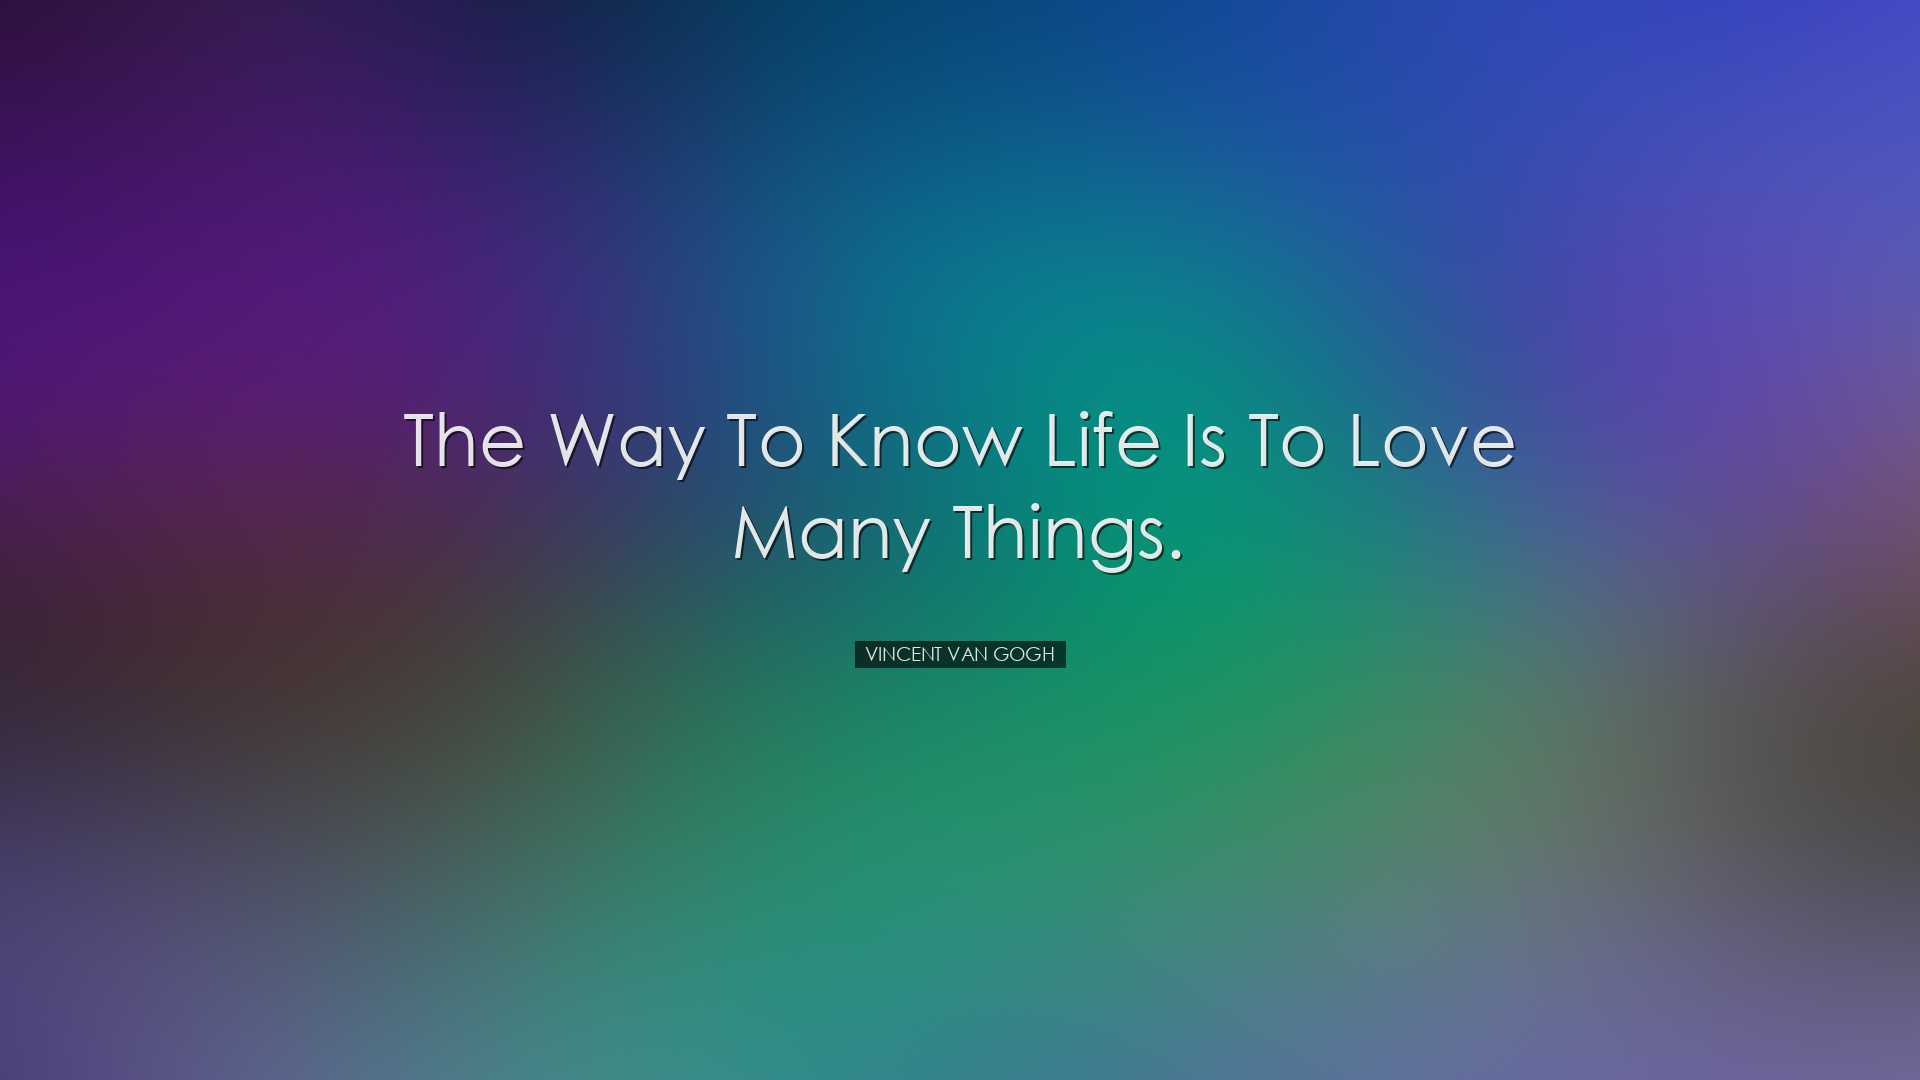 The way to know life is to love many things. - Vincent Van Gogh